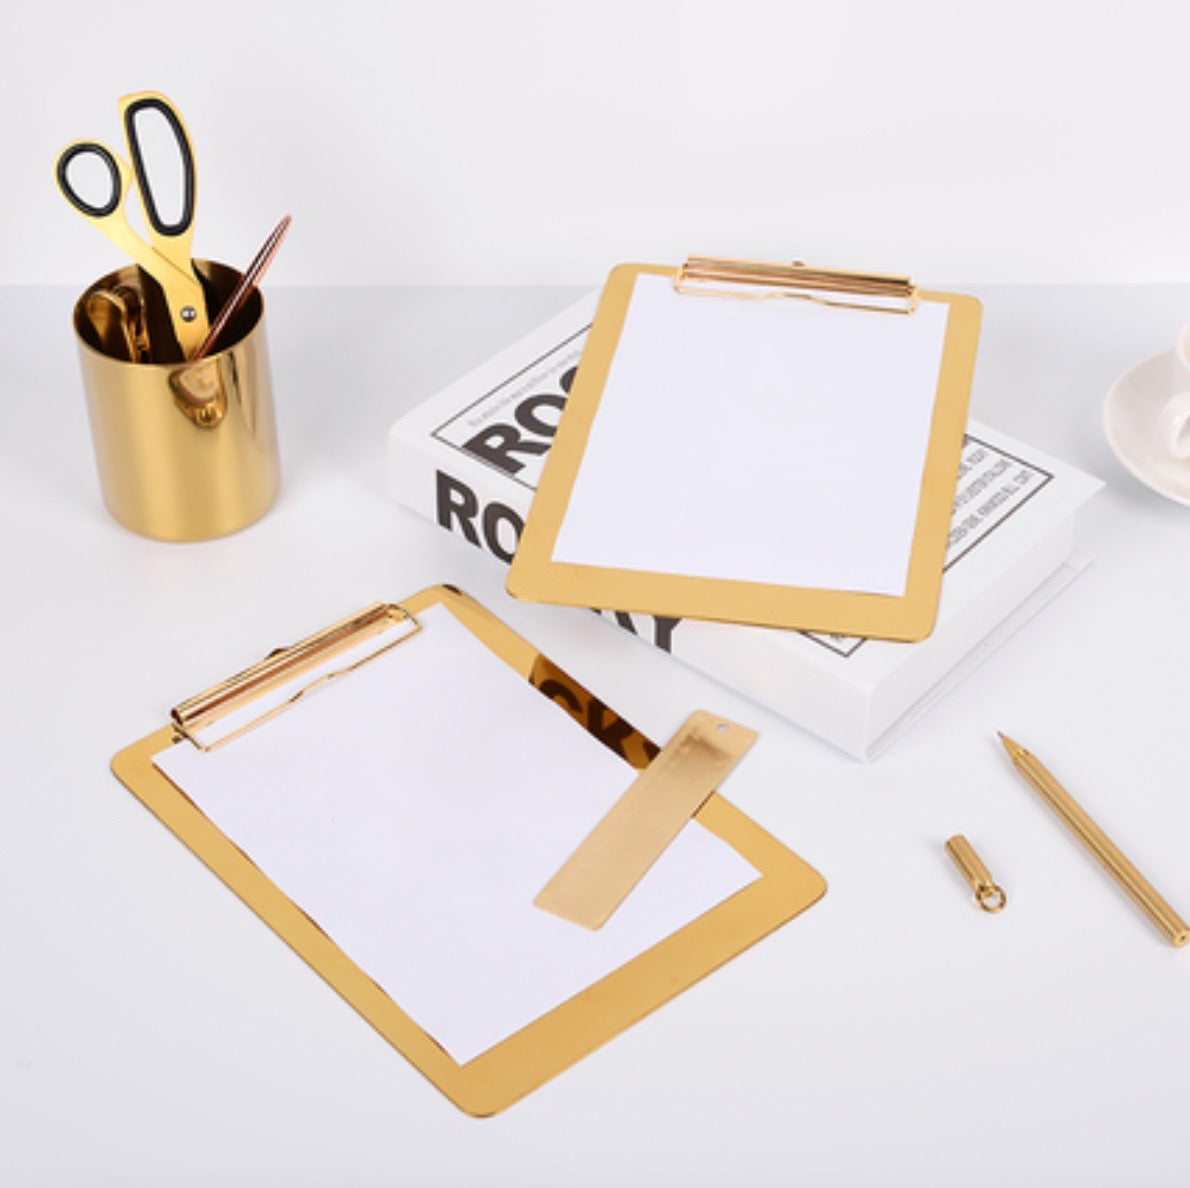 Metallic golden clipboard for A4 papers, gold colour with shiny finish